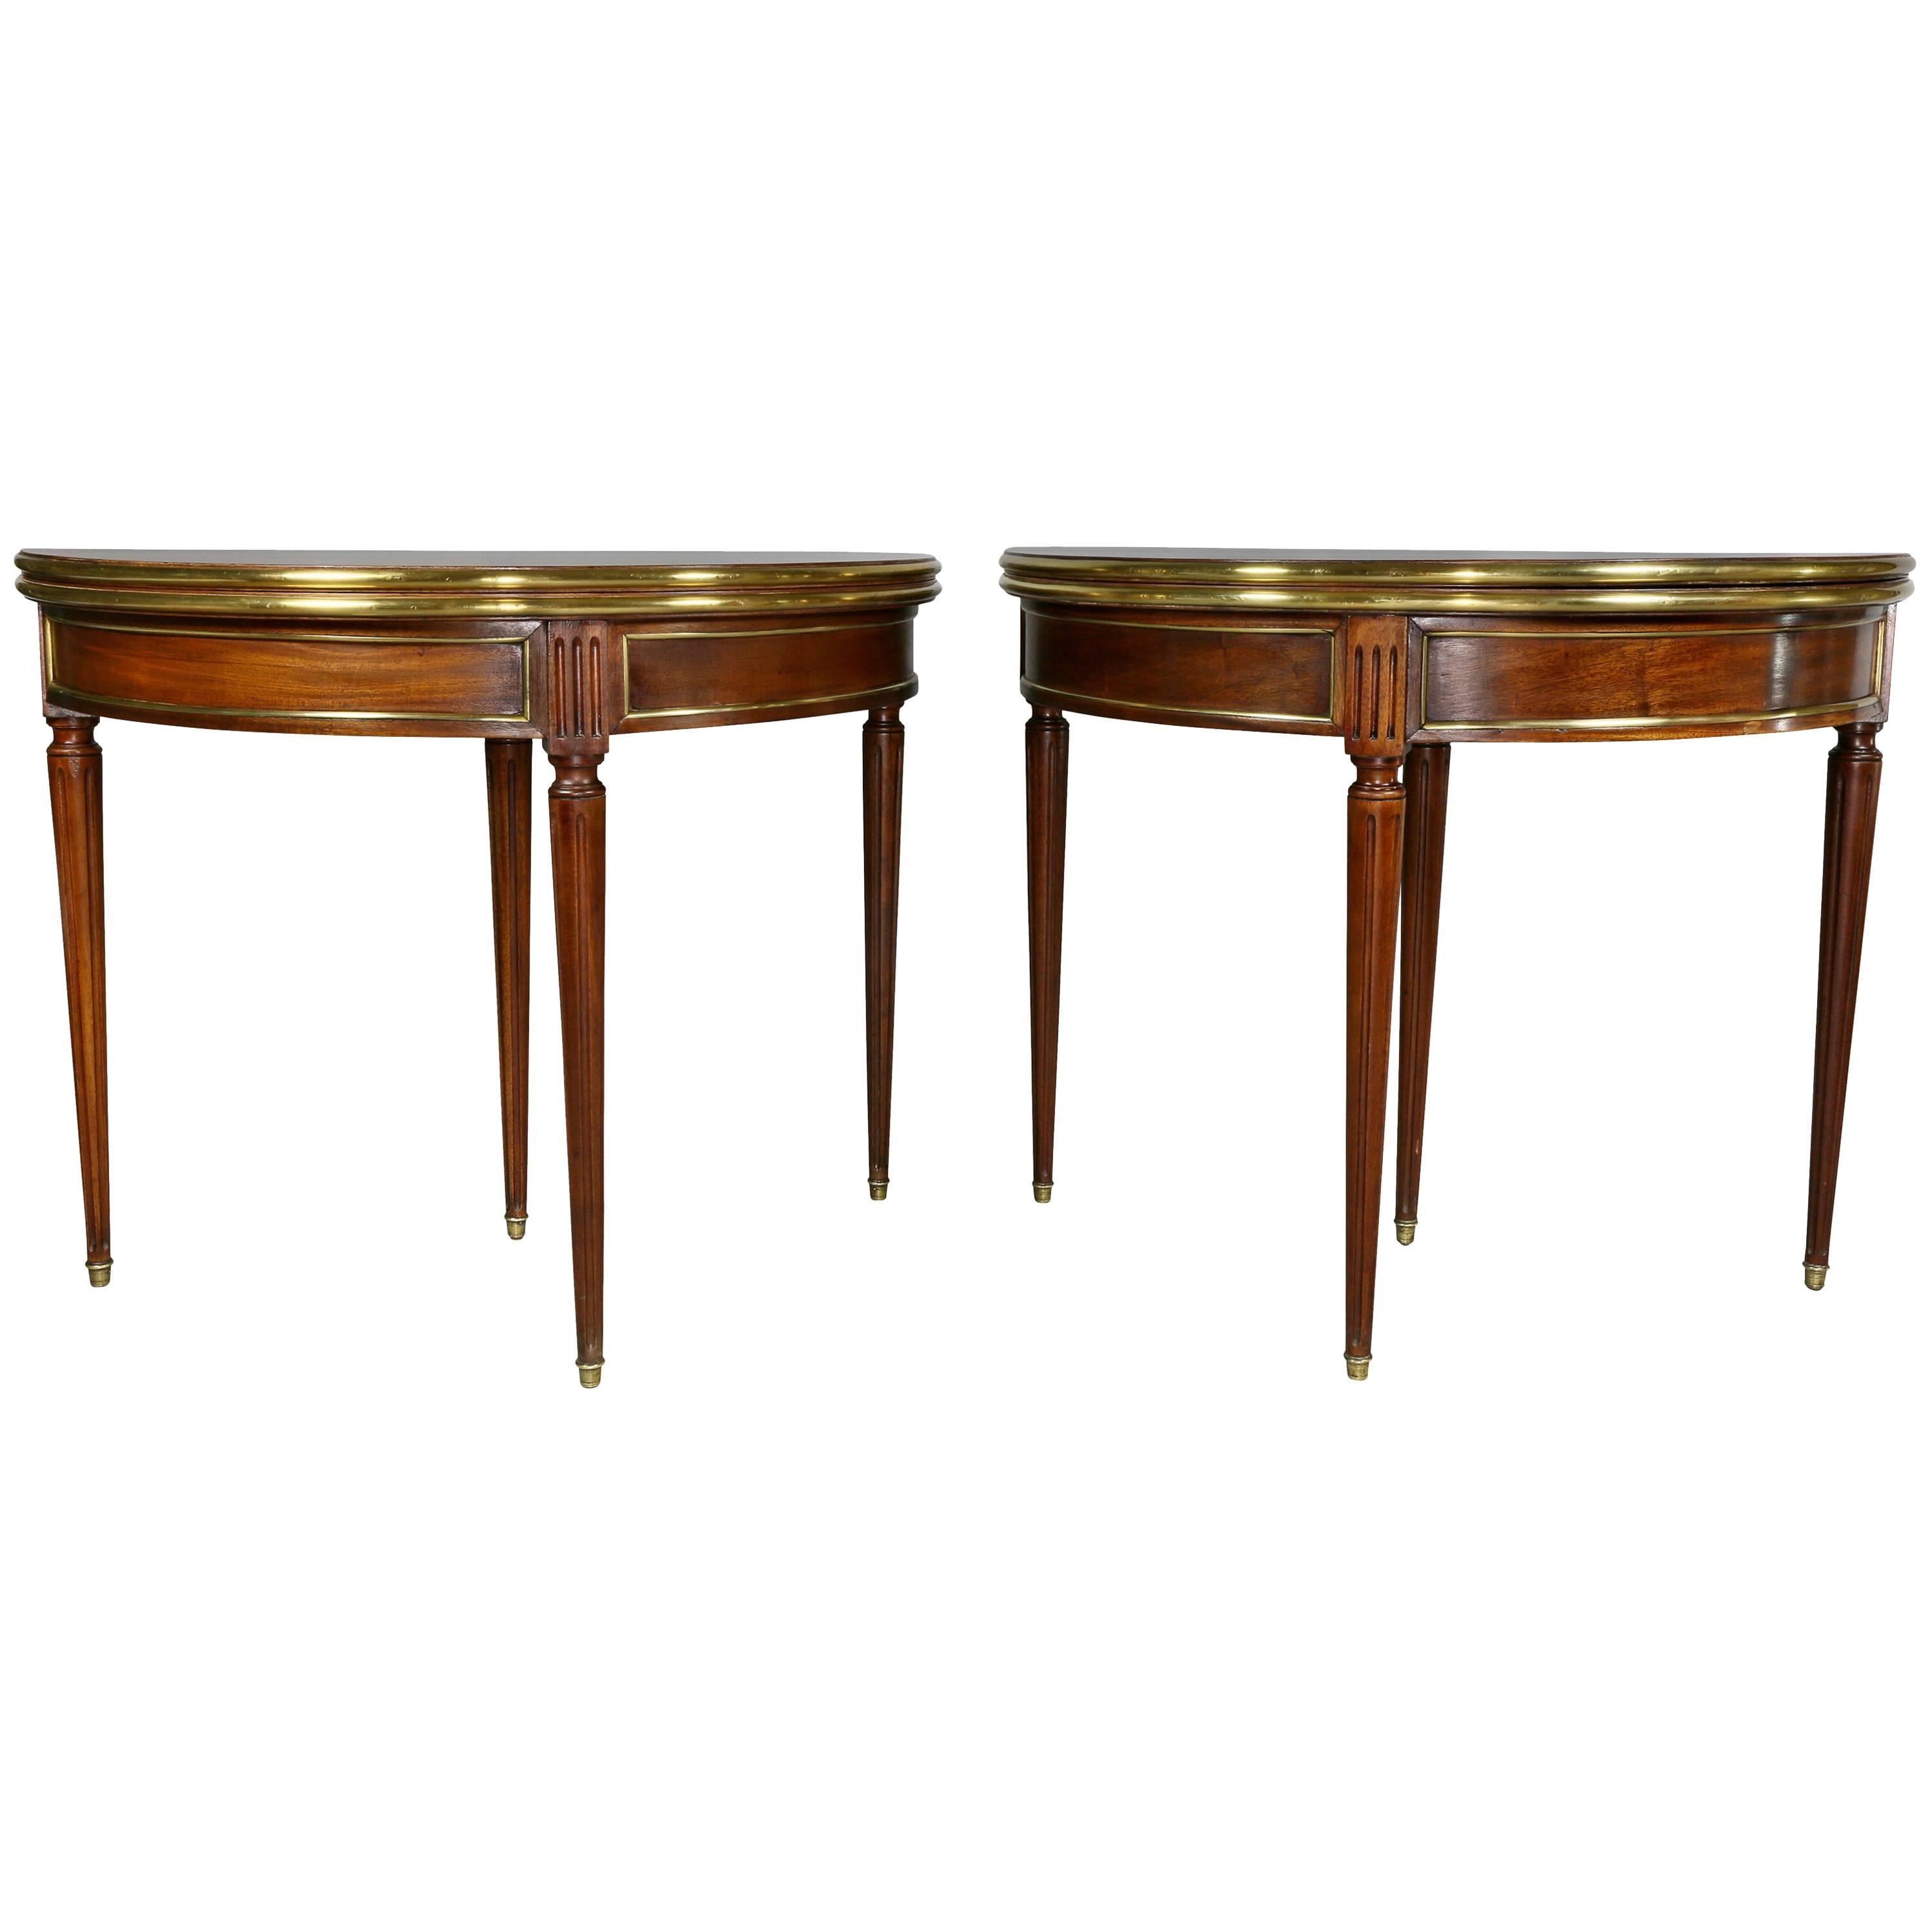 Pair of Directoire Style Mahogany and Brass-Mounted Console/Games Tables